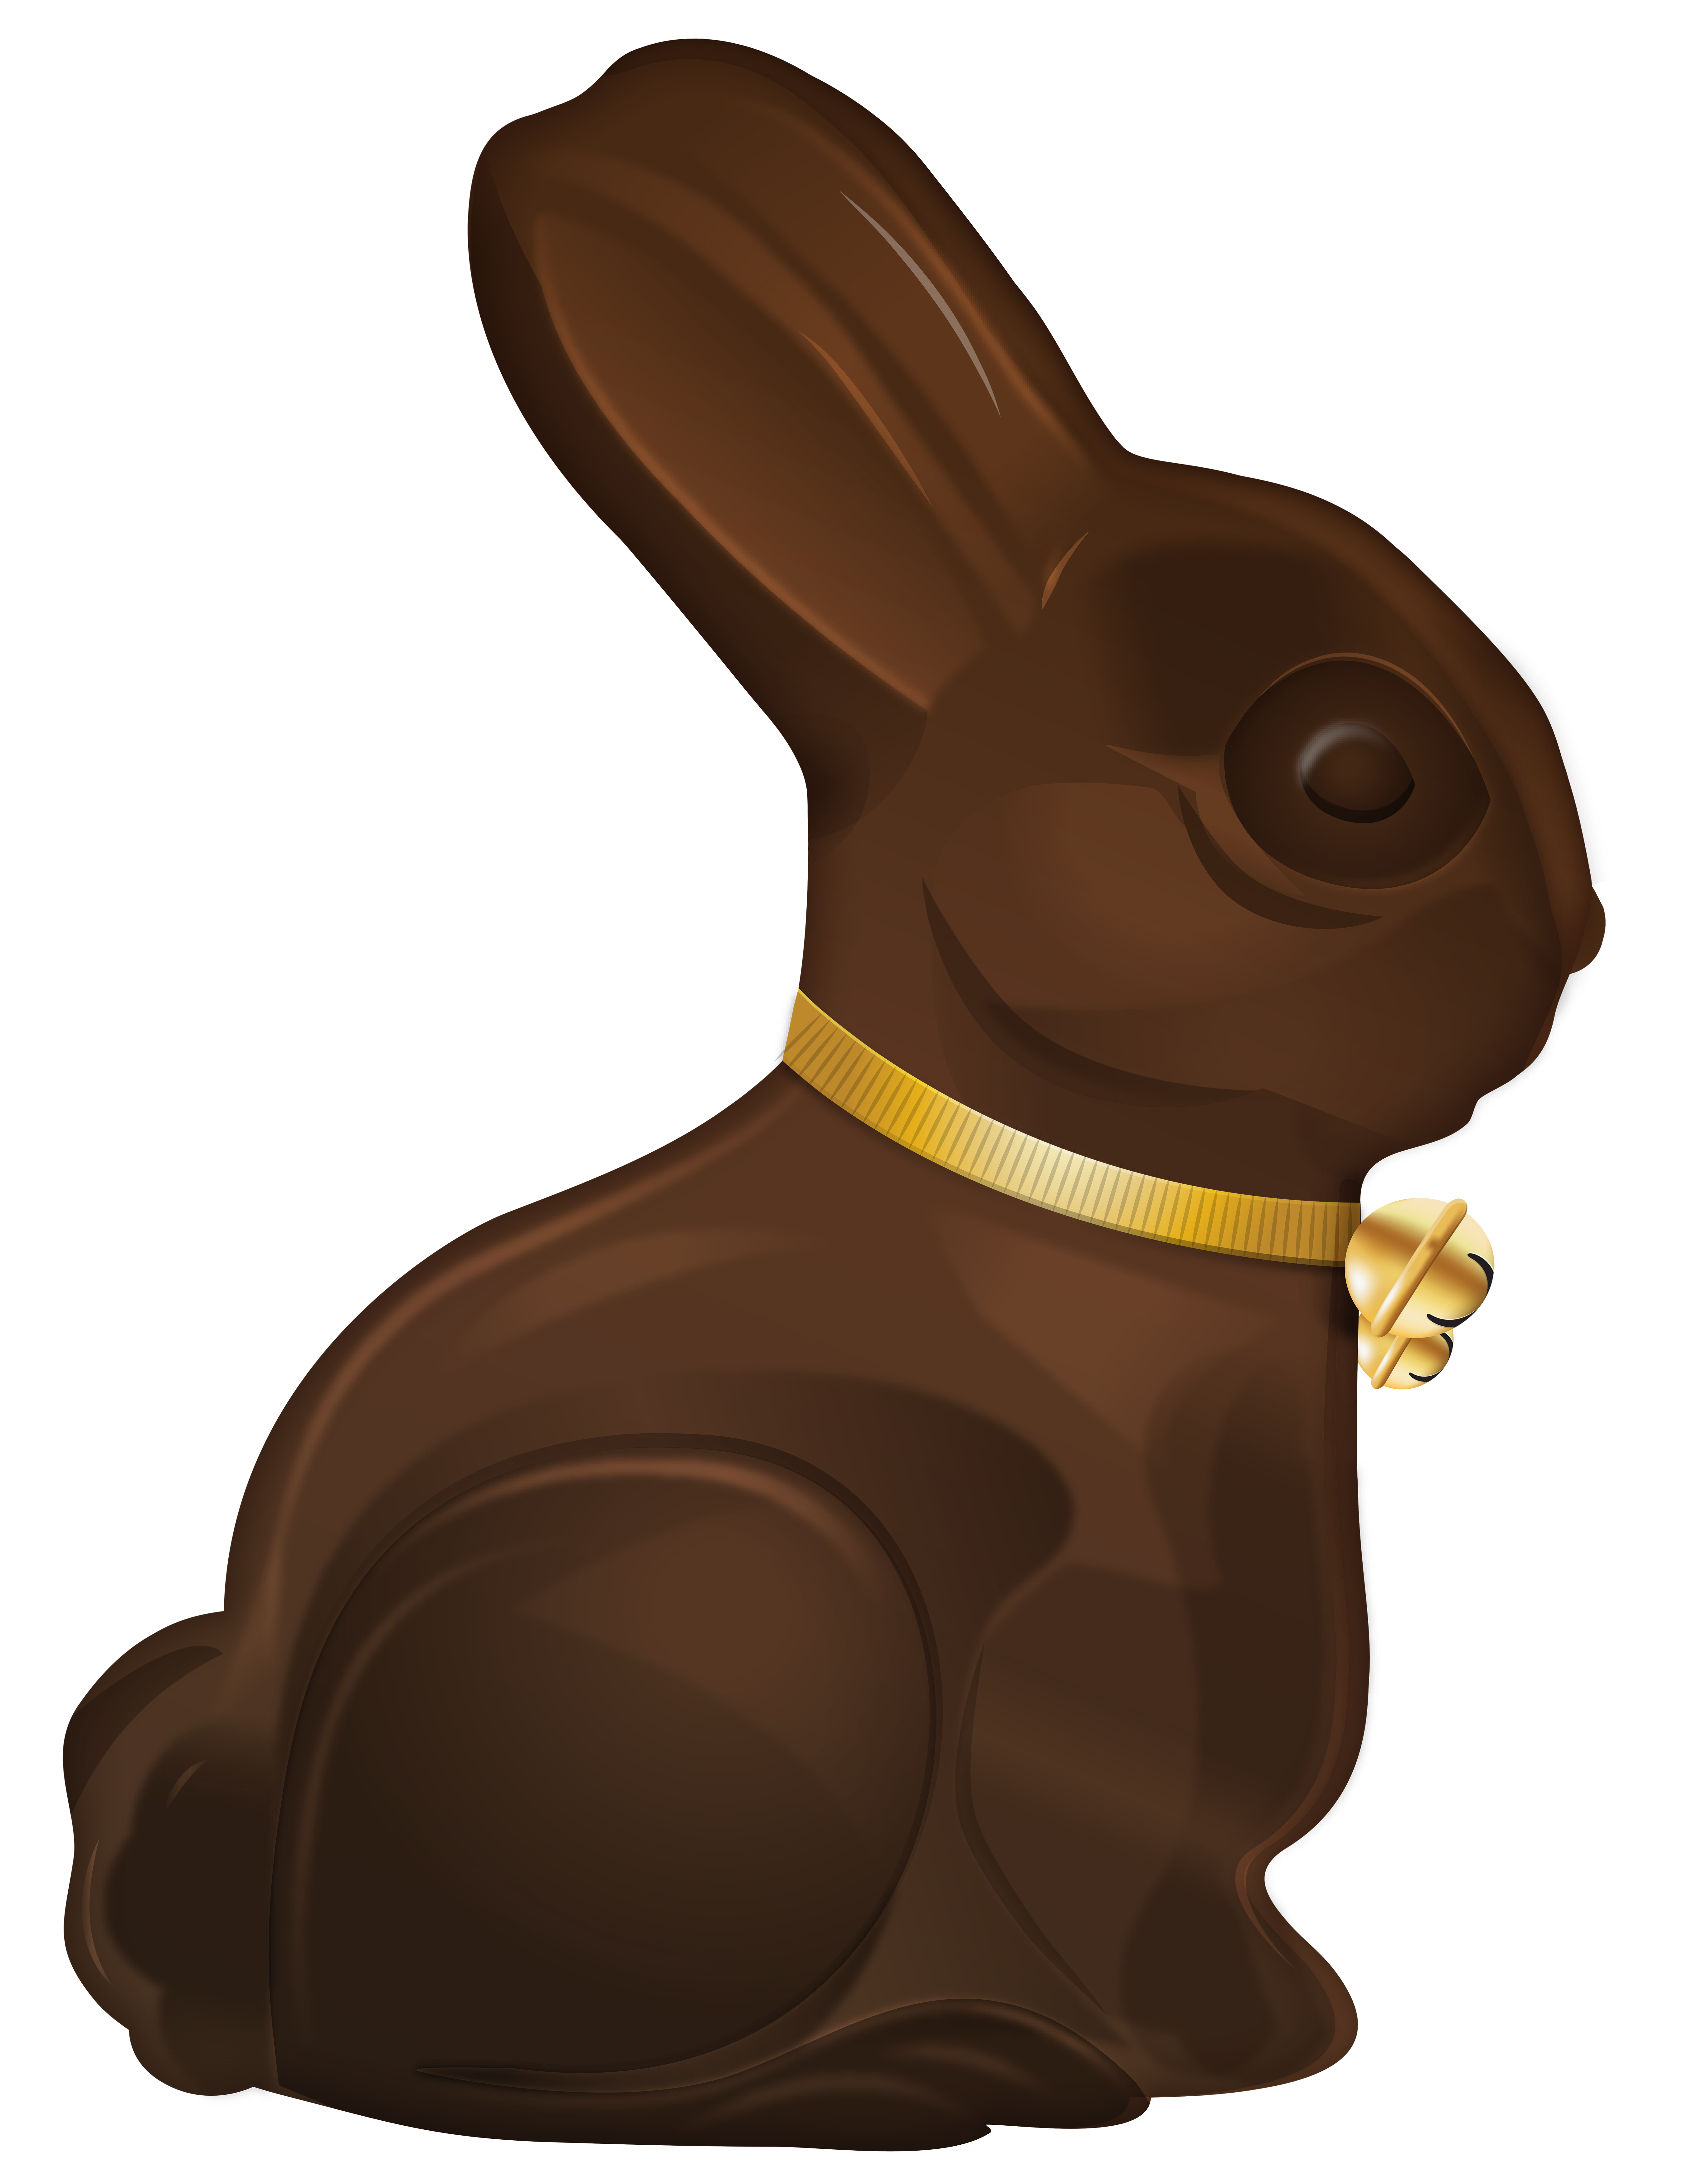 Easter clipart chocolate. Choco bunny png clip